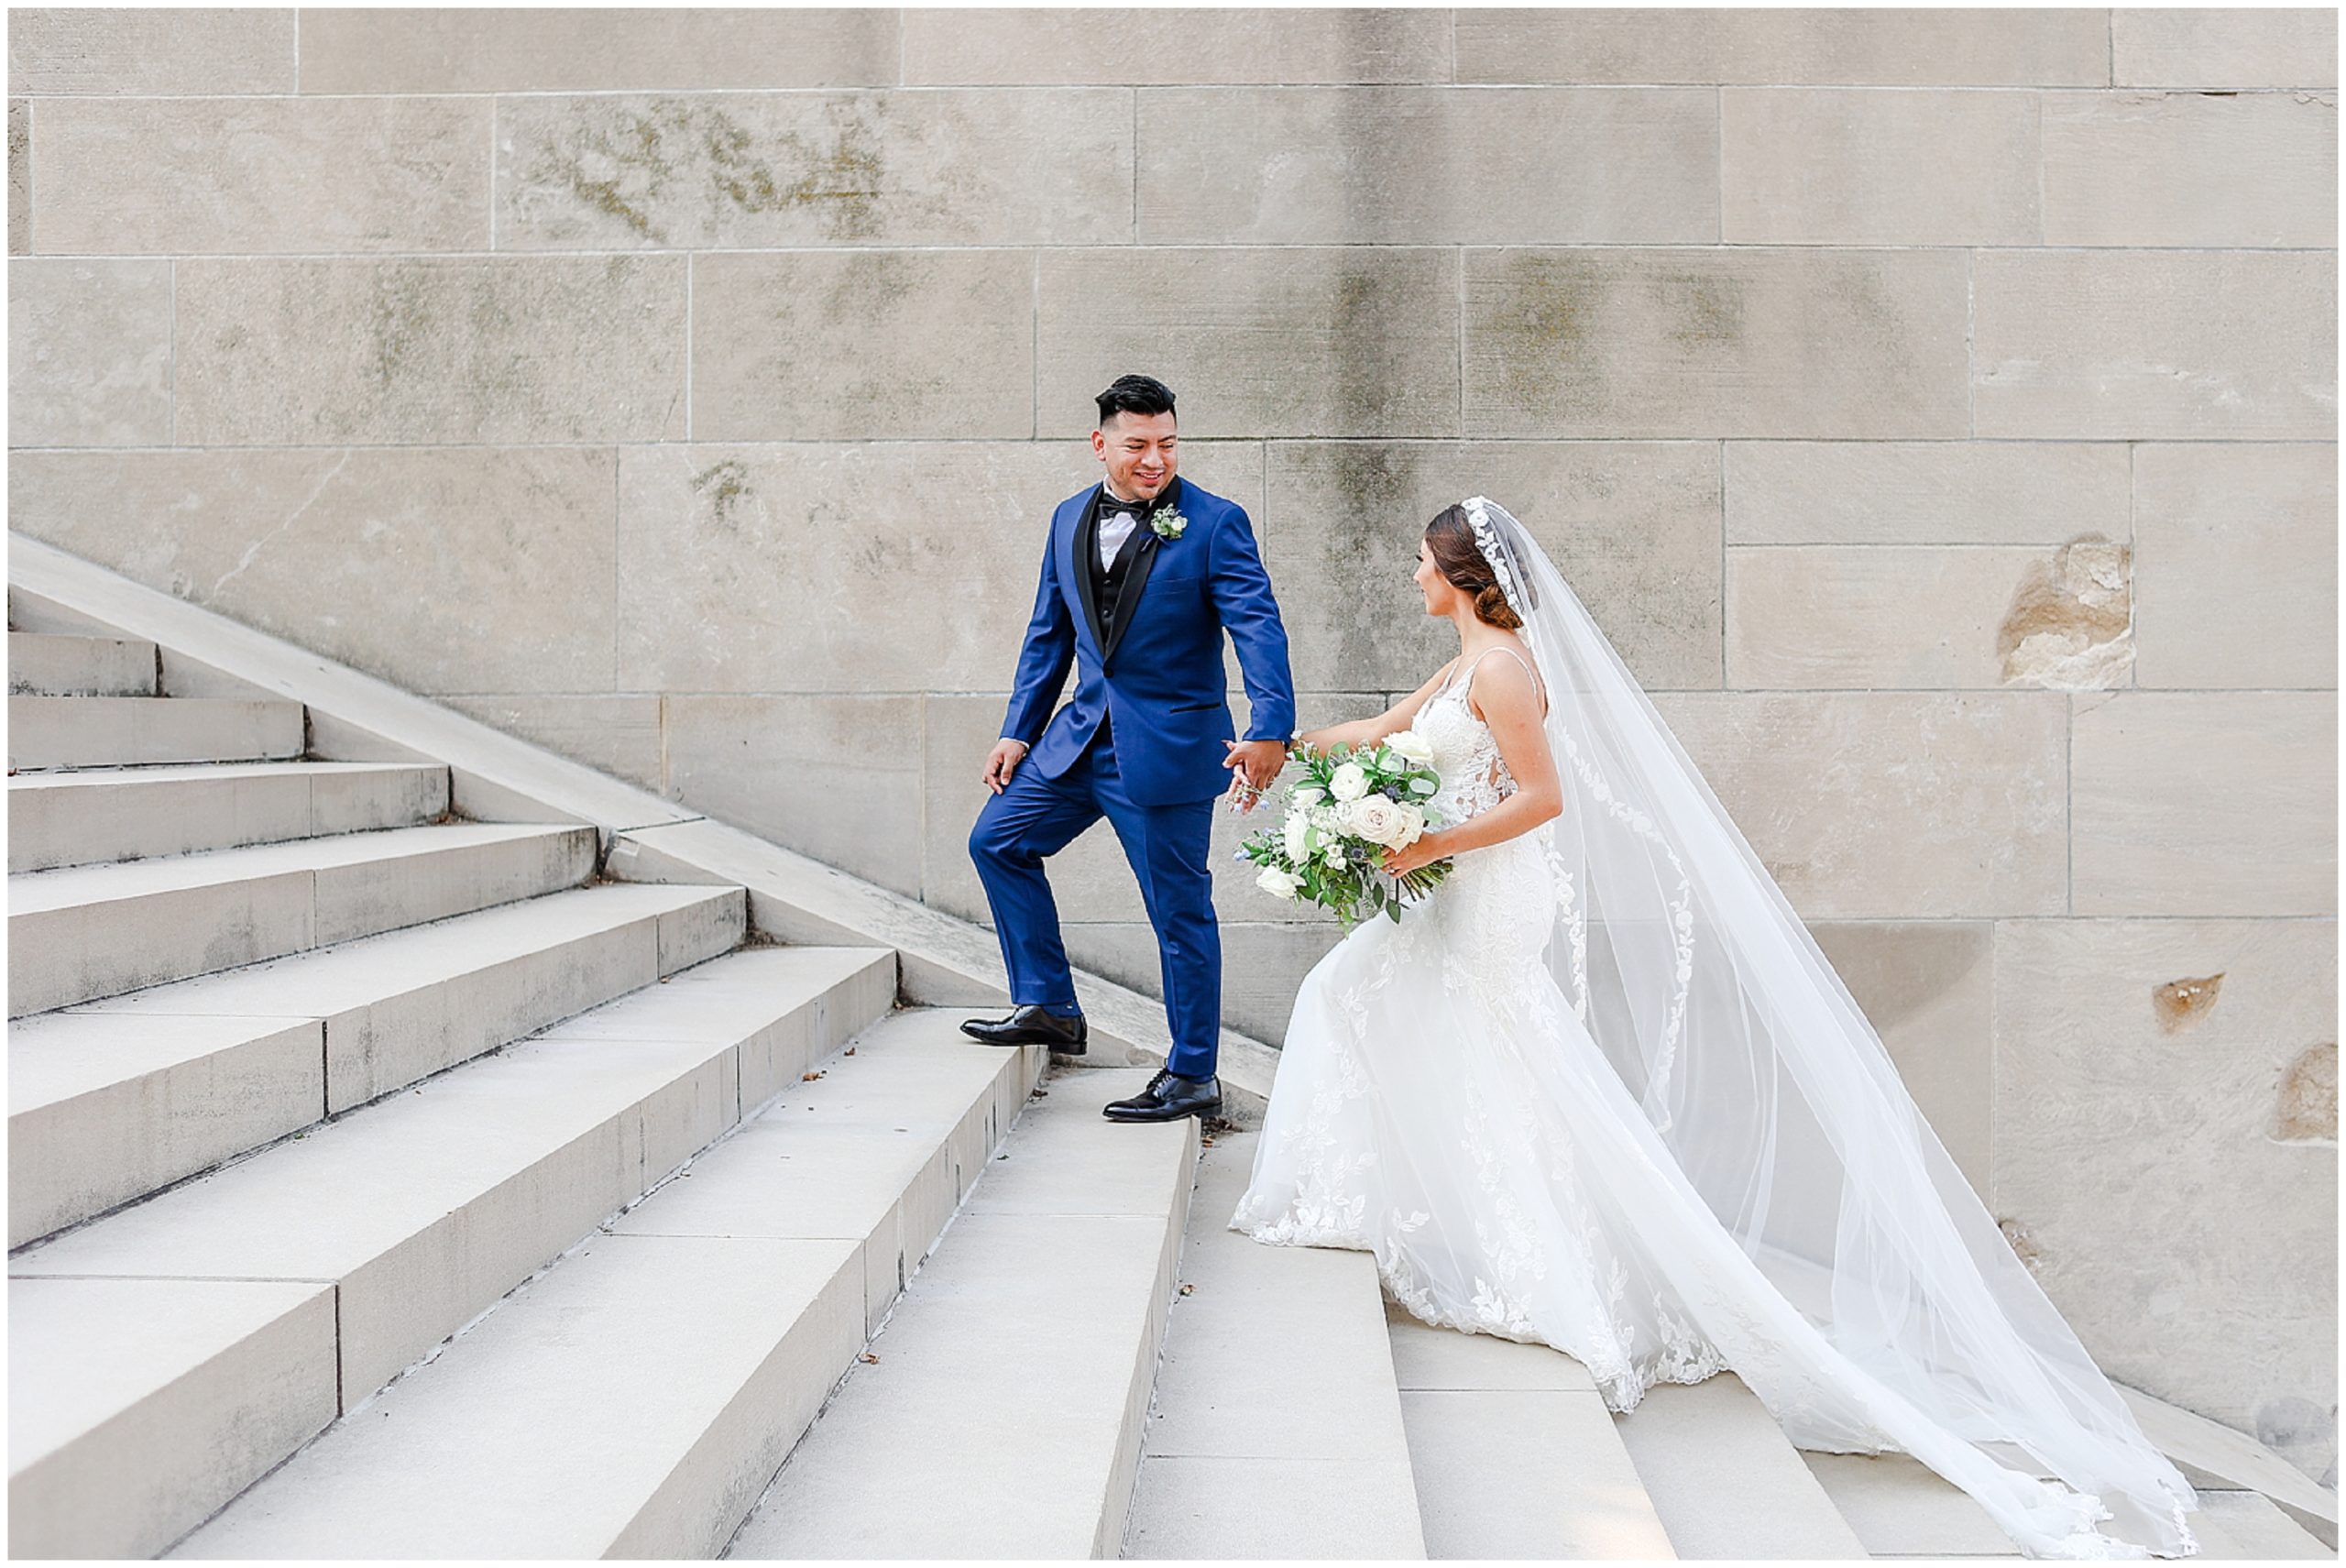 Where to take photos in Kansas City | Best Photo Locations in KC | Kansas City Wedding Photography | Liberty Memorial & Union Station - Bride & Groom Walking Up the Stairs